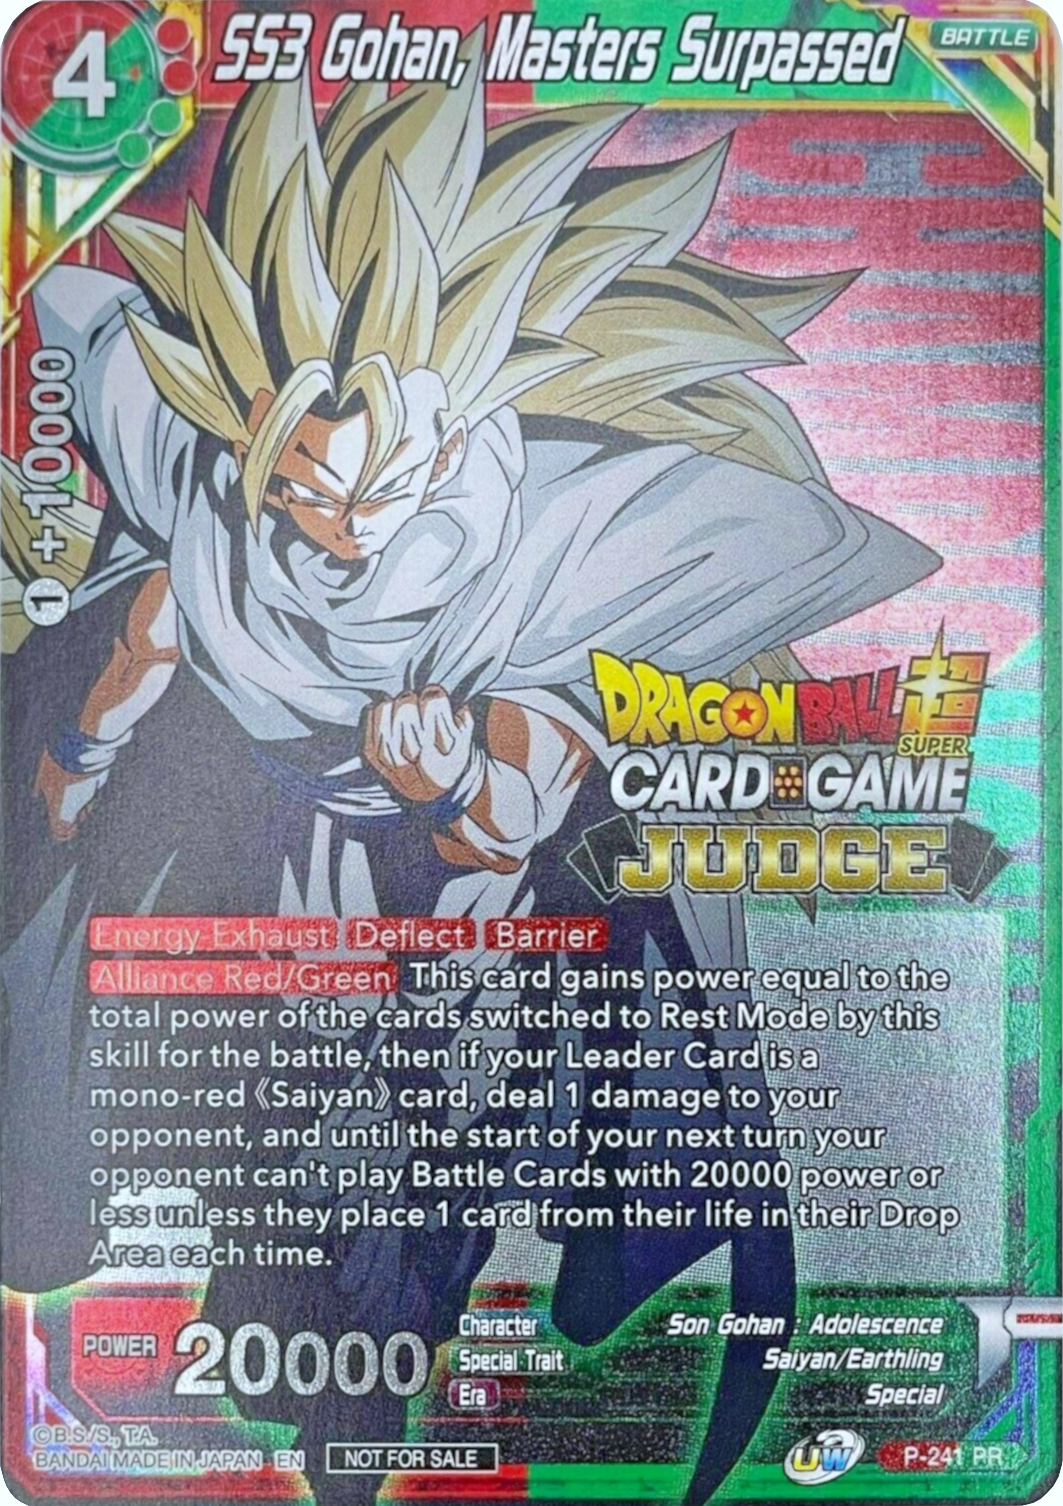 SS3 Gohan, Masters Surpassed (Level 2) (P-241) [Promotion Cards] | North Valley Games